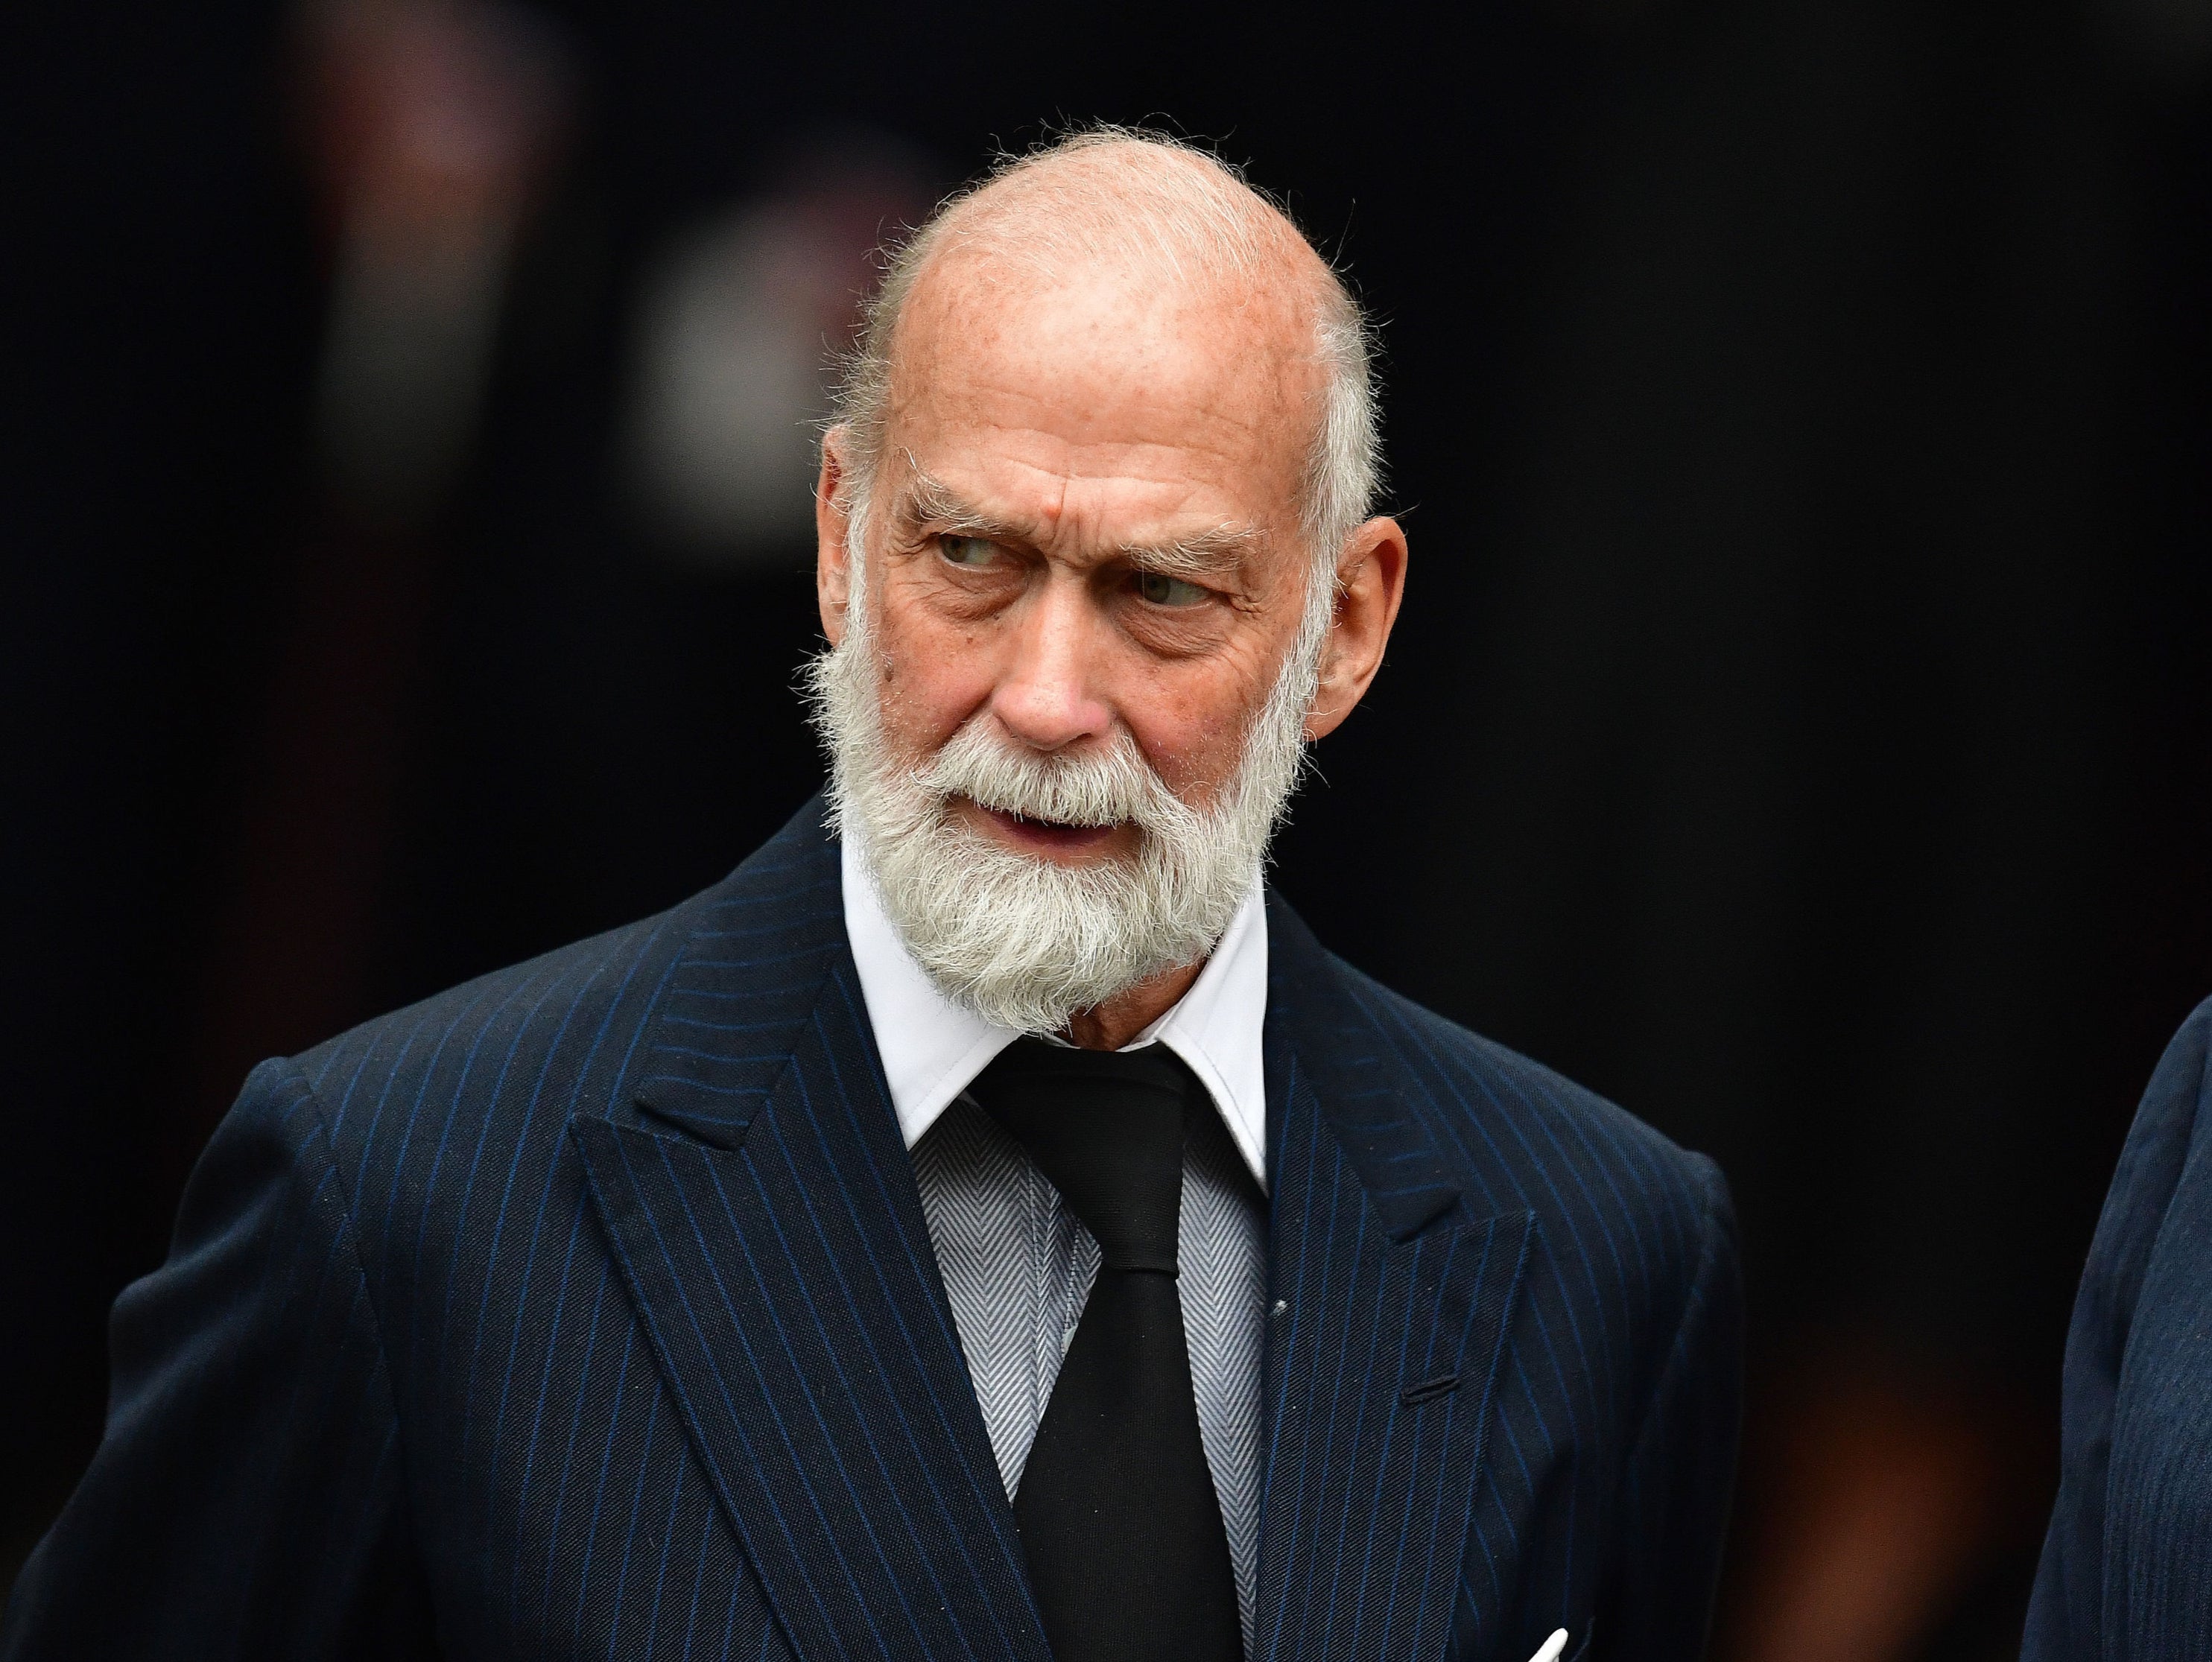 Prince Michael of Kent, photographed in 2017